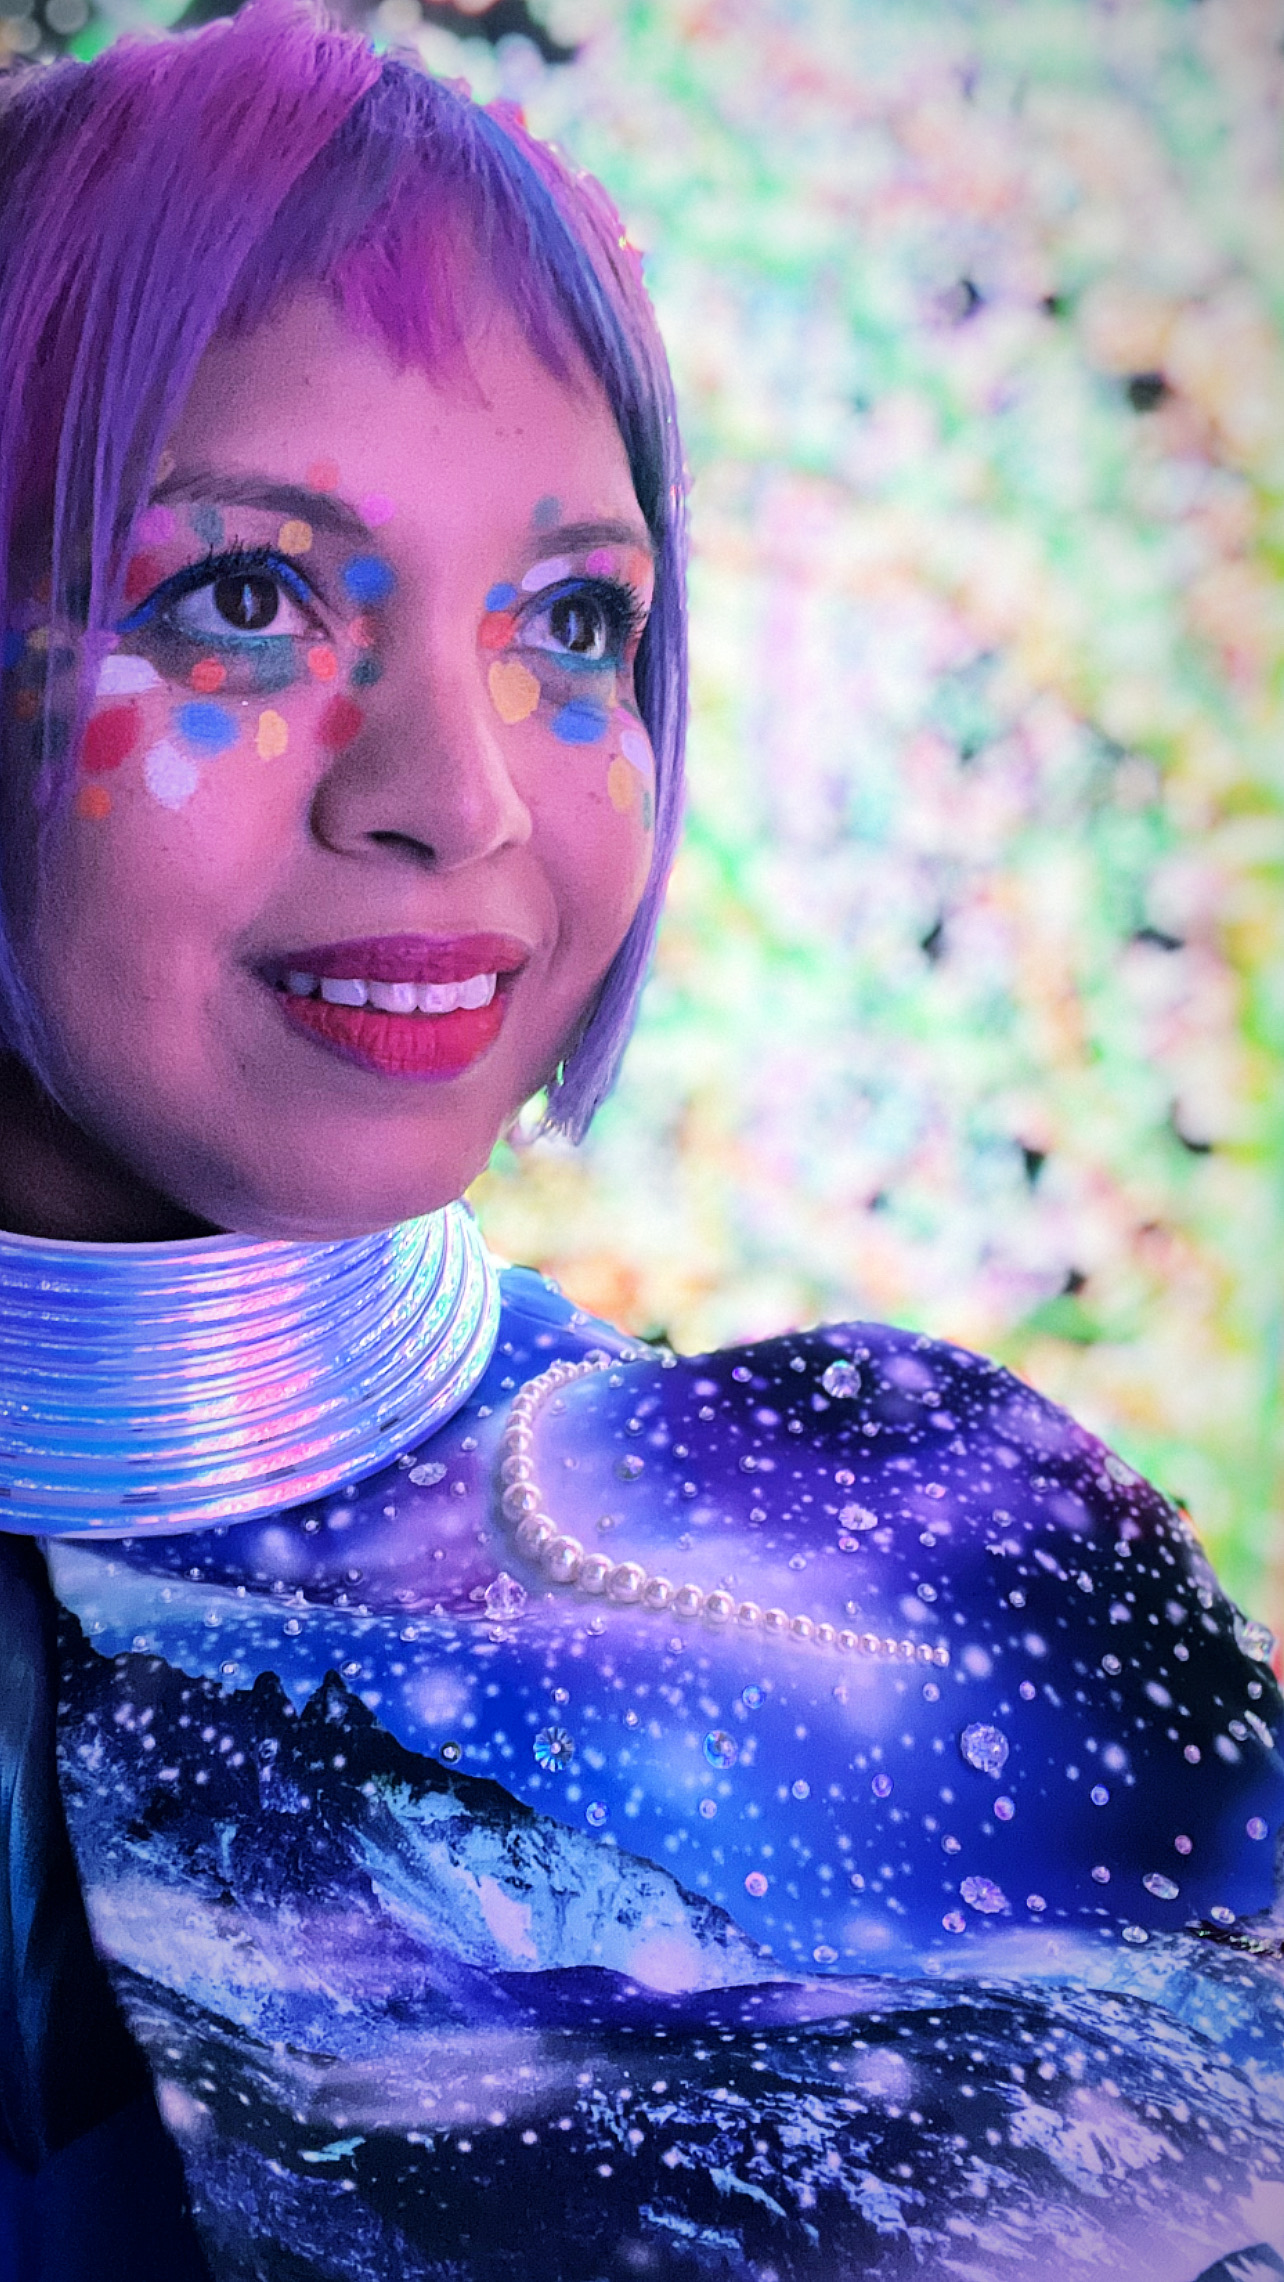 close up selfie with rainbow spot make up and sci-fi costume